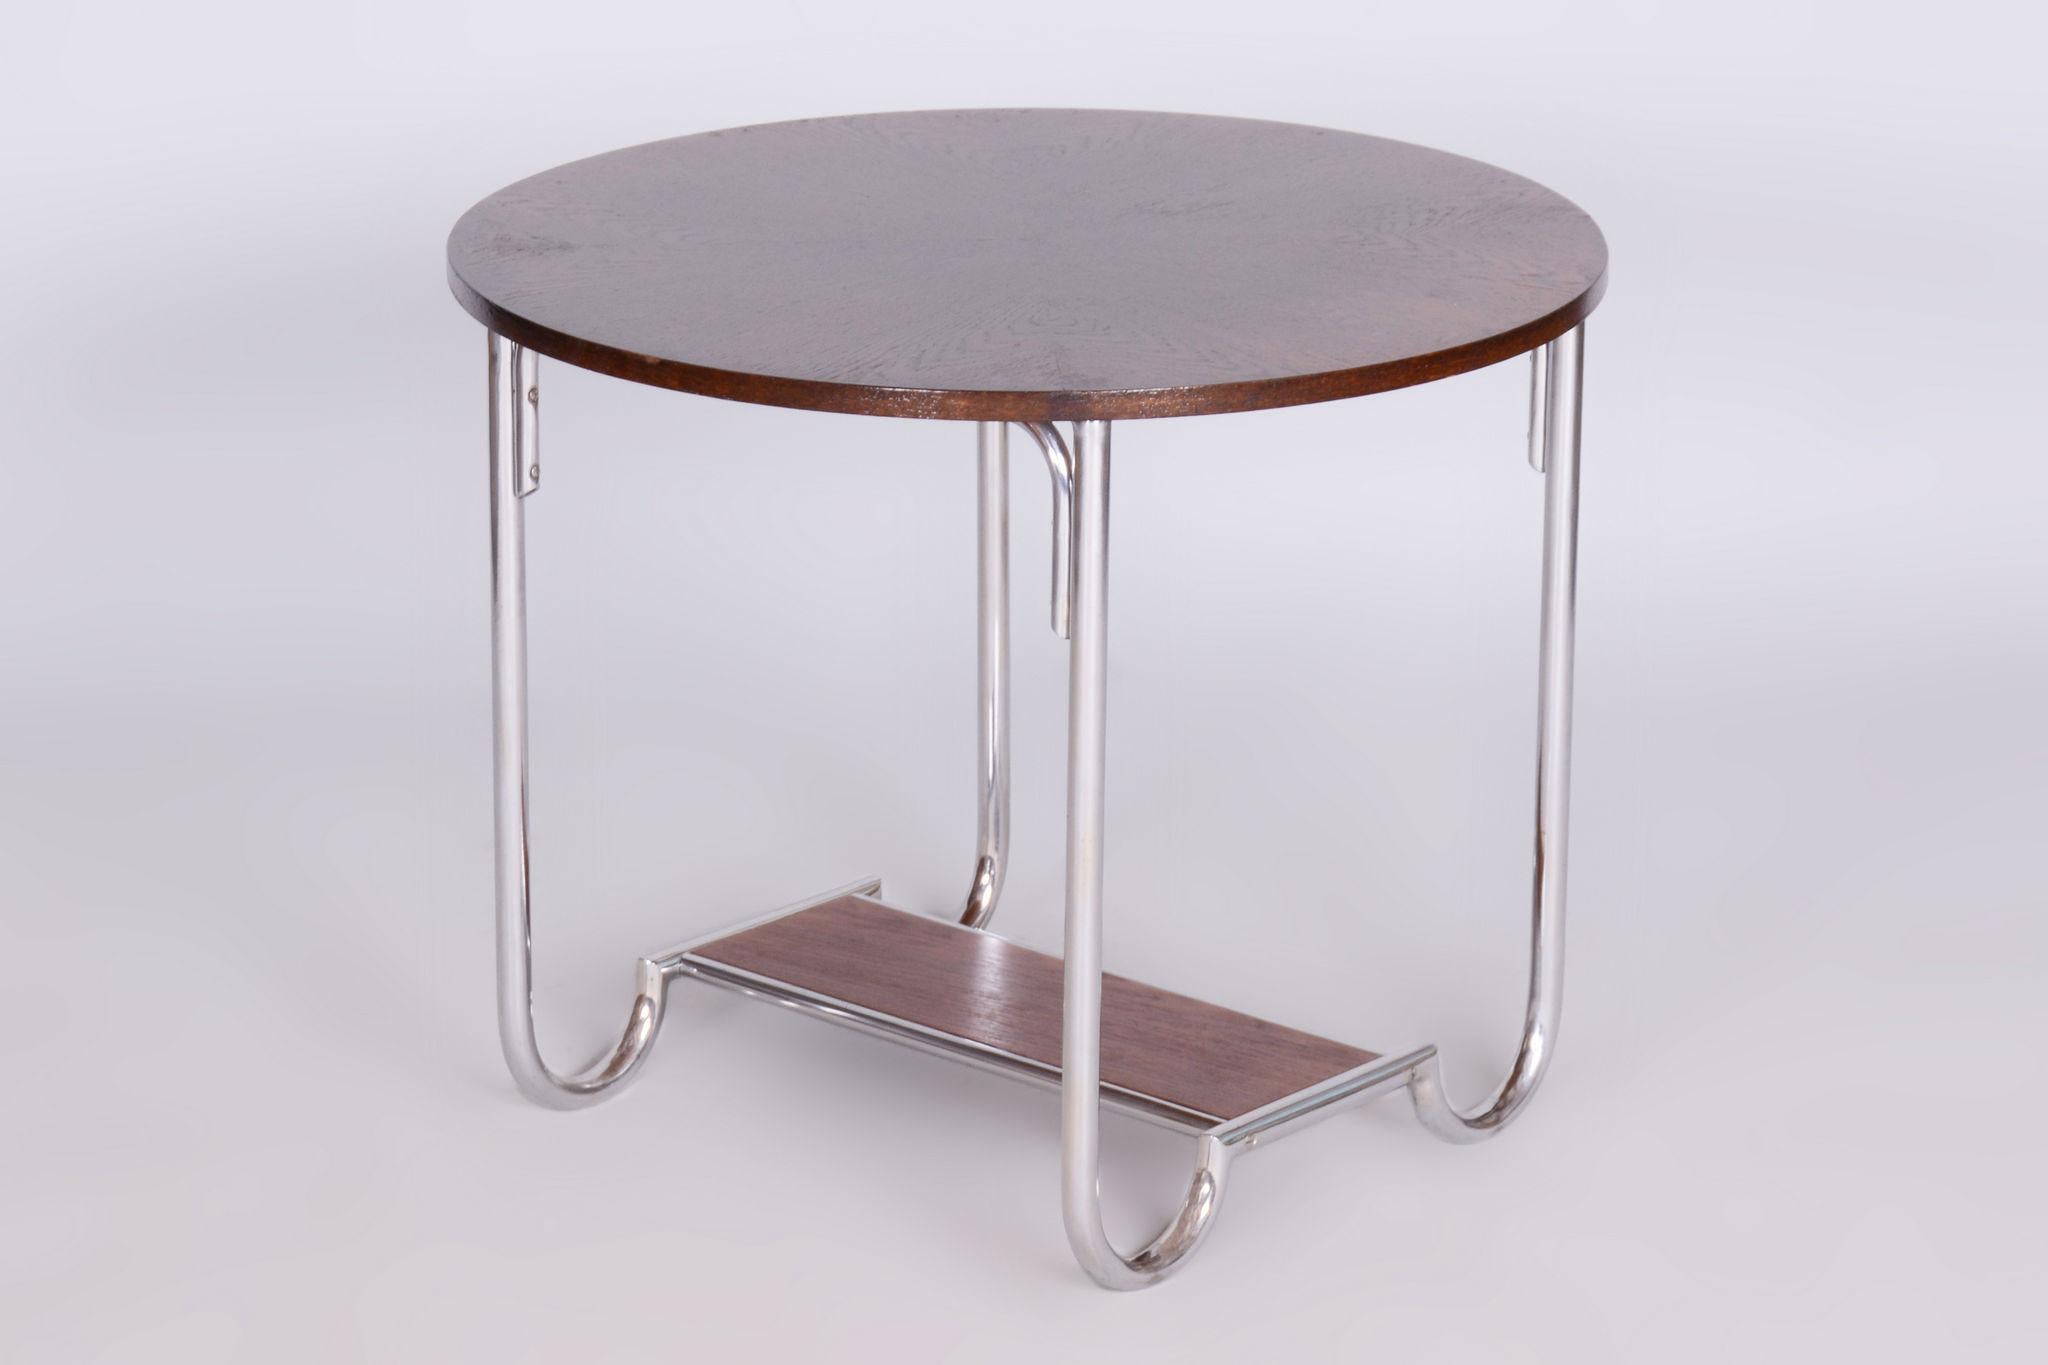 Restored Bauhaus Oak Small Round Table, Chrome-Plated Steel, Czechia, 1930s For Sale 5